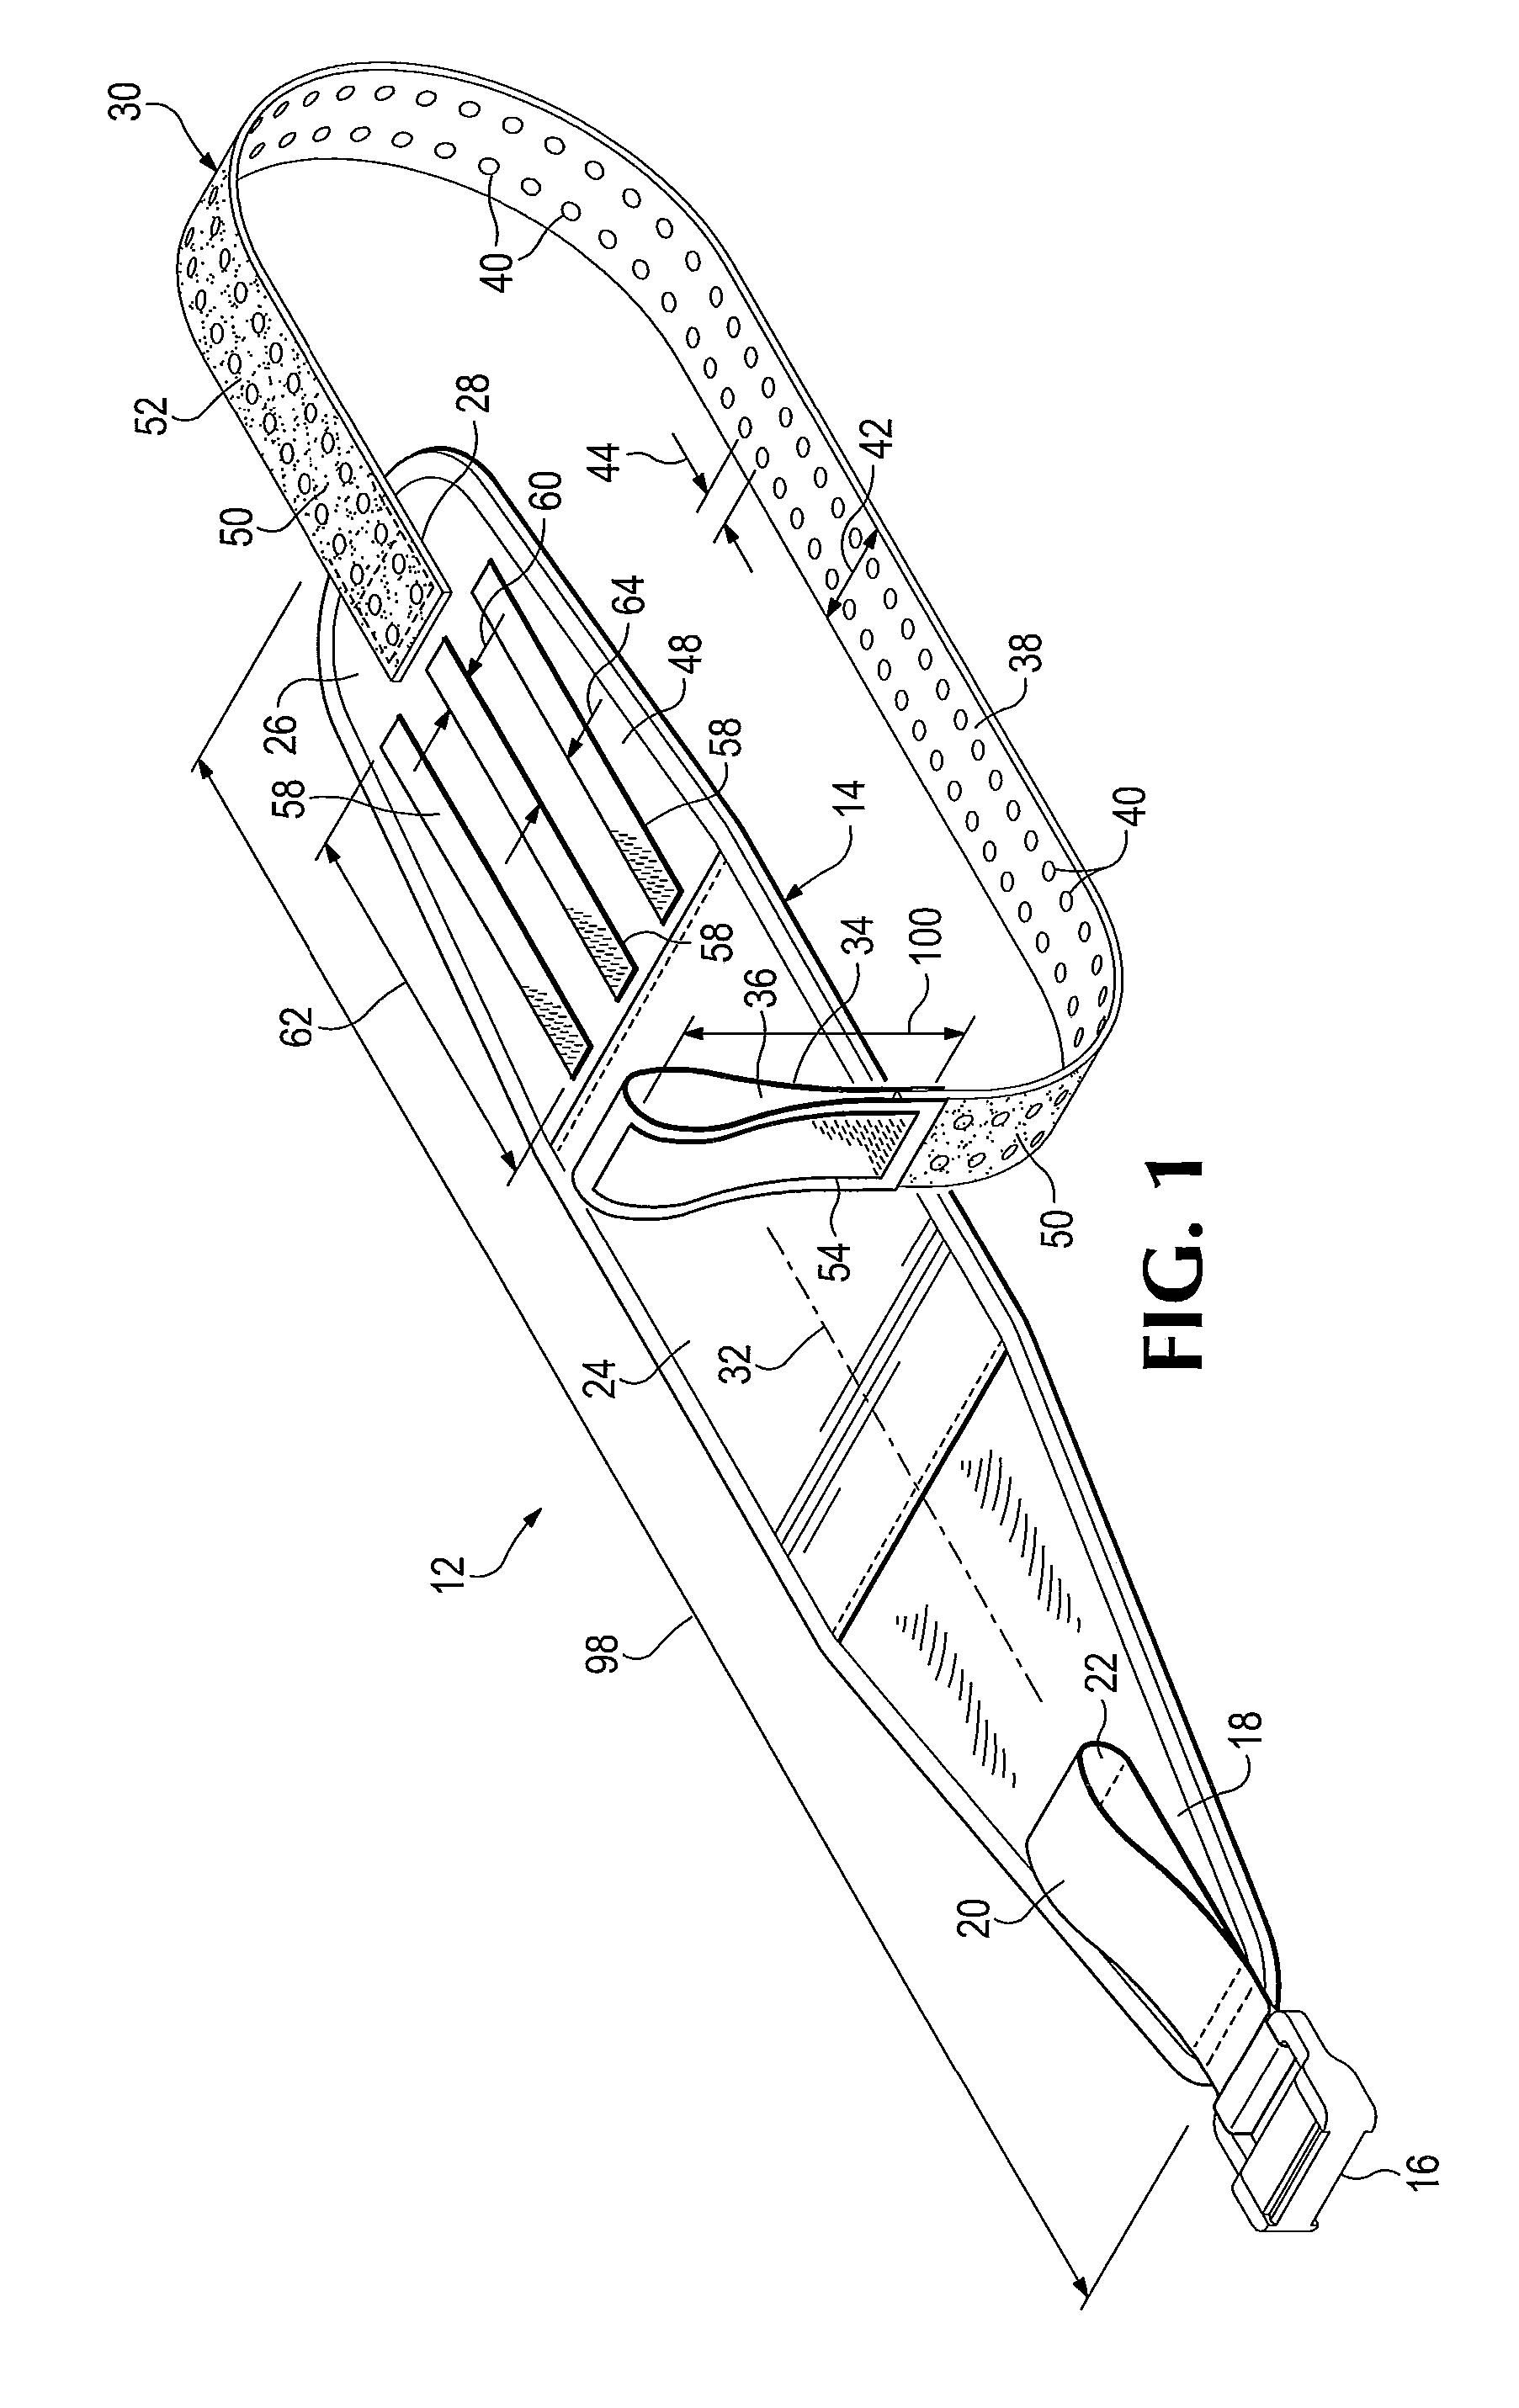 Device and method for control of hemorrhage